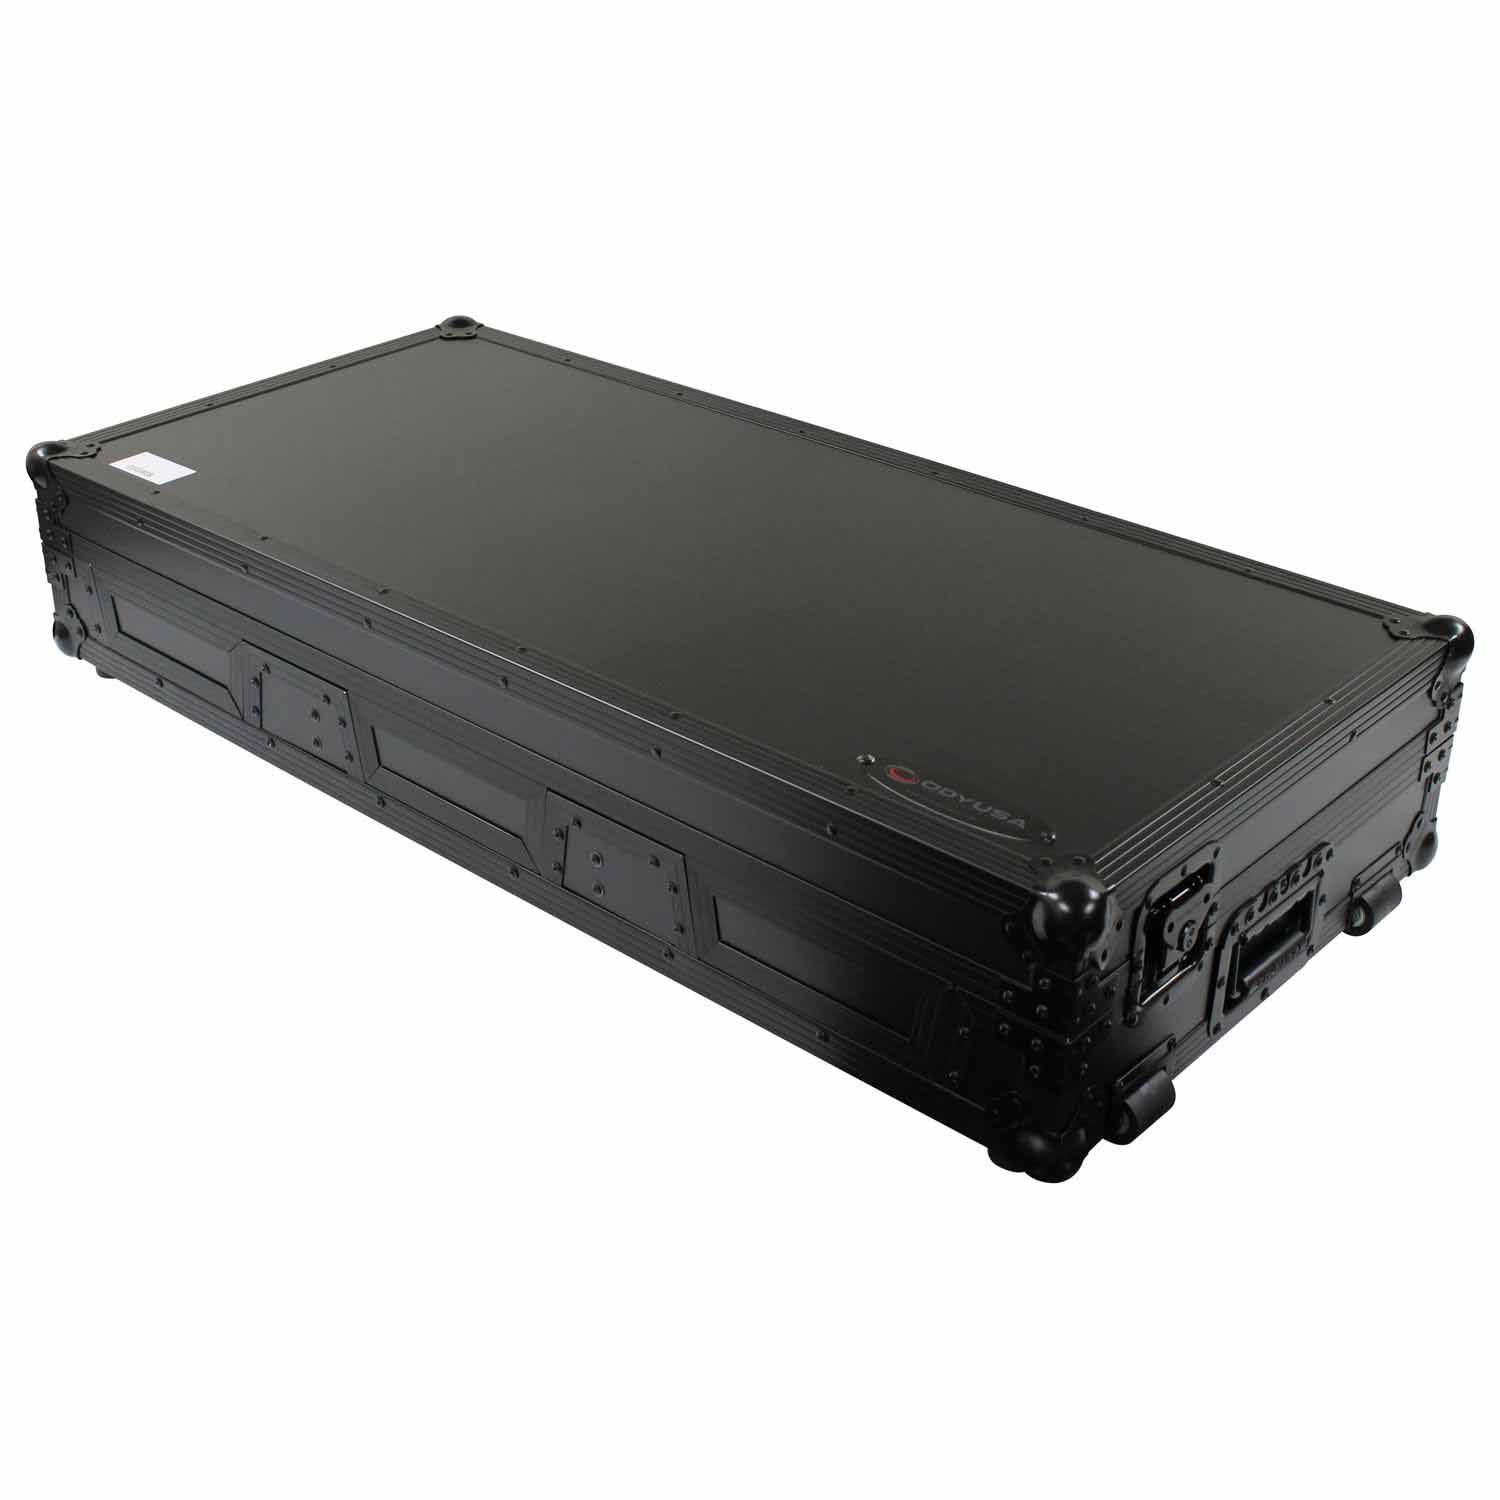 Odyssey FZ12CDJWXDBL Coffin Flight Case For 12″ Format DJ Mixer and Two Large Format Media Players - Black - Hollywood DJ